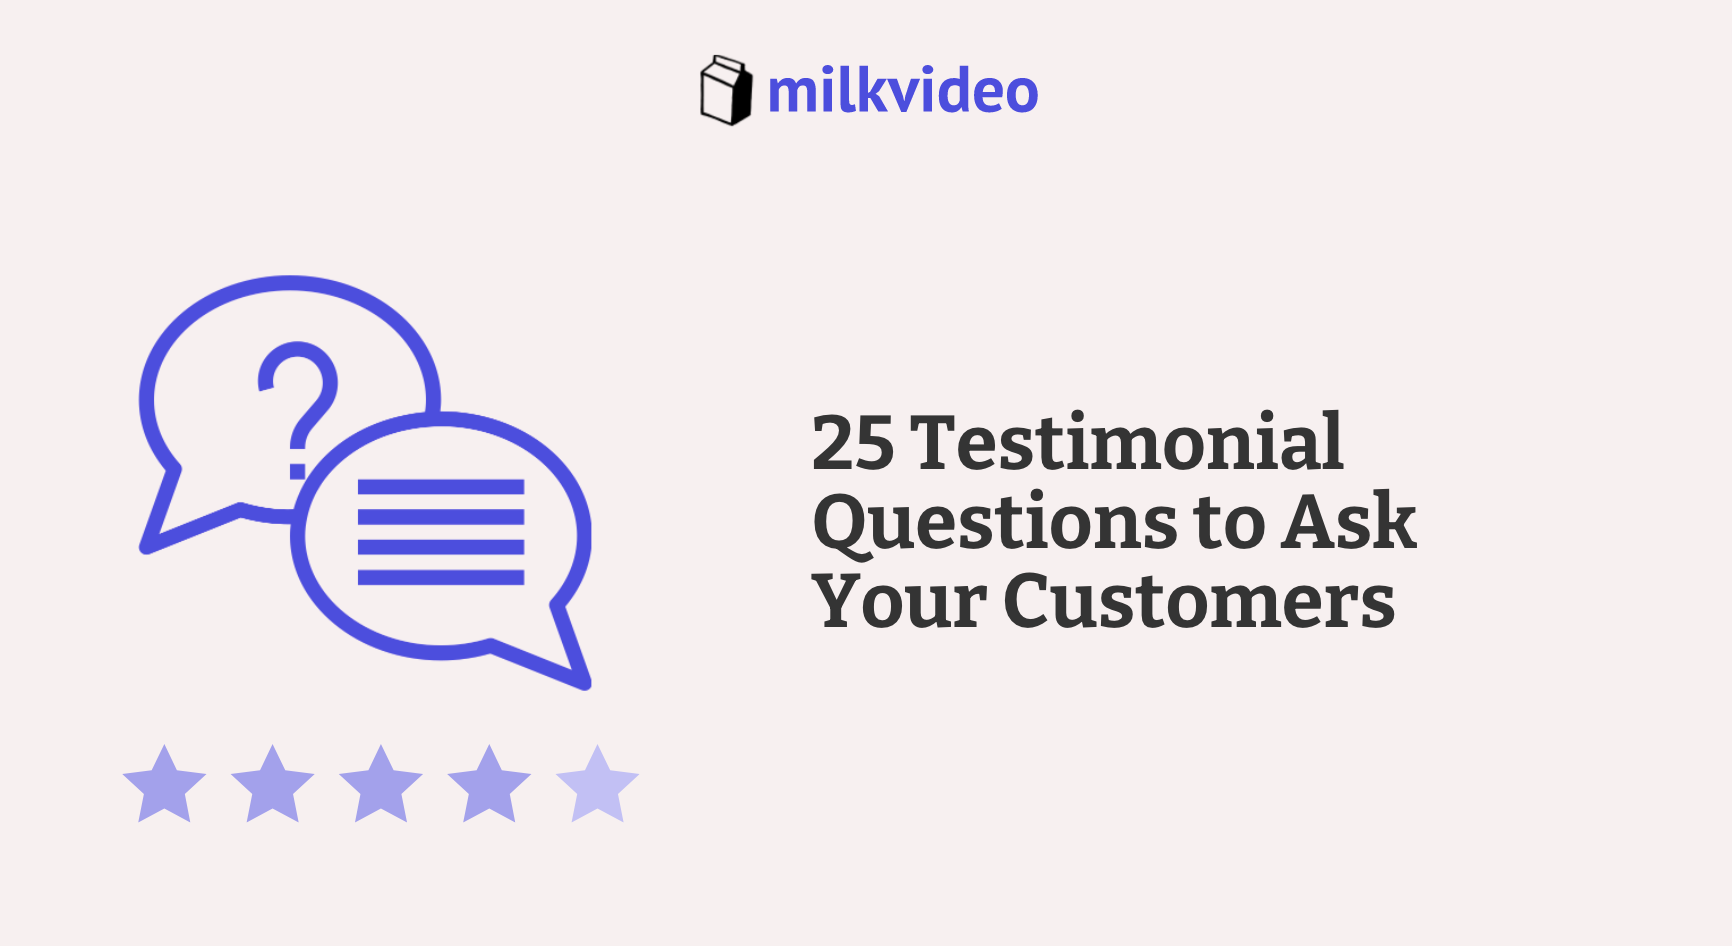 25 Testimonial Questions to Ask Your Customers